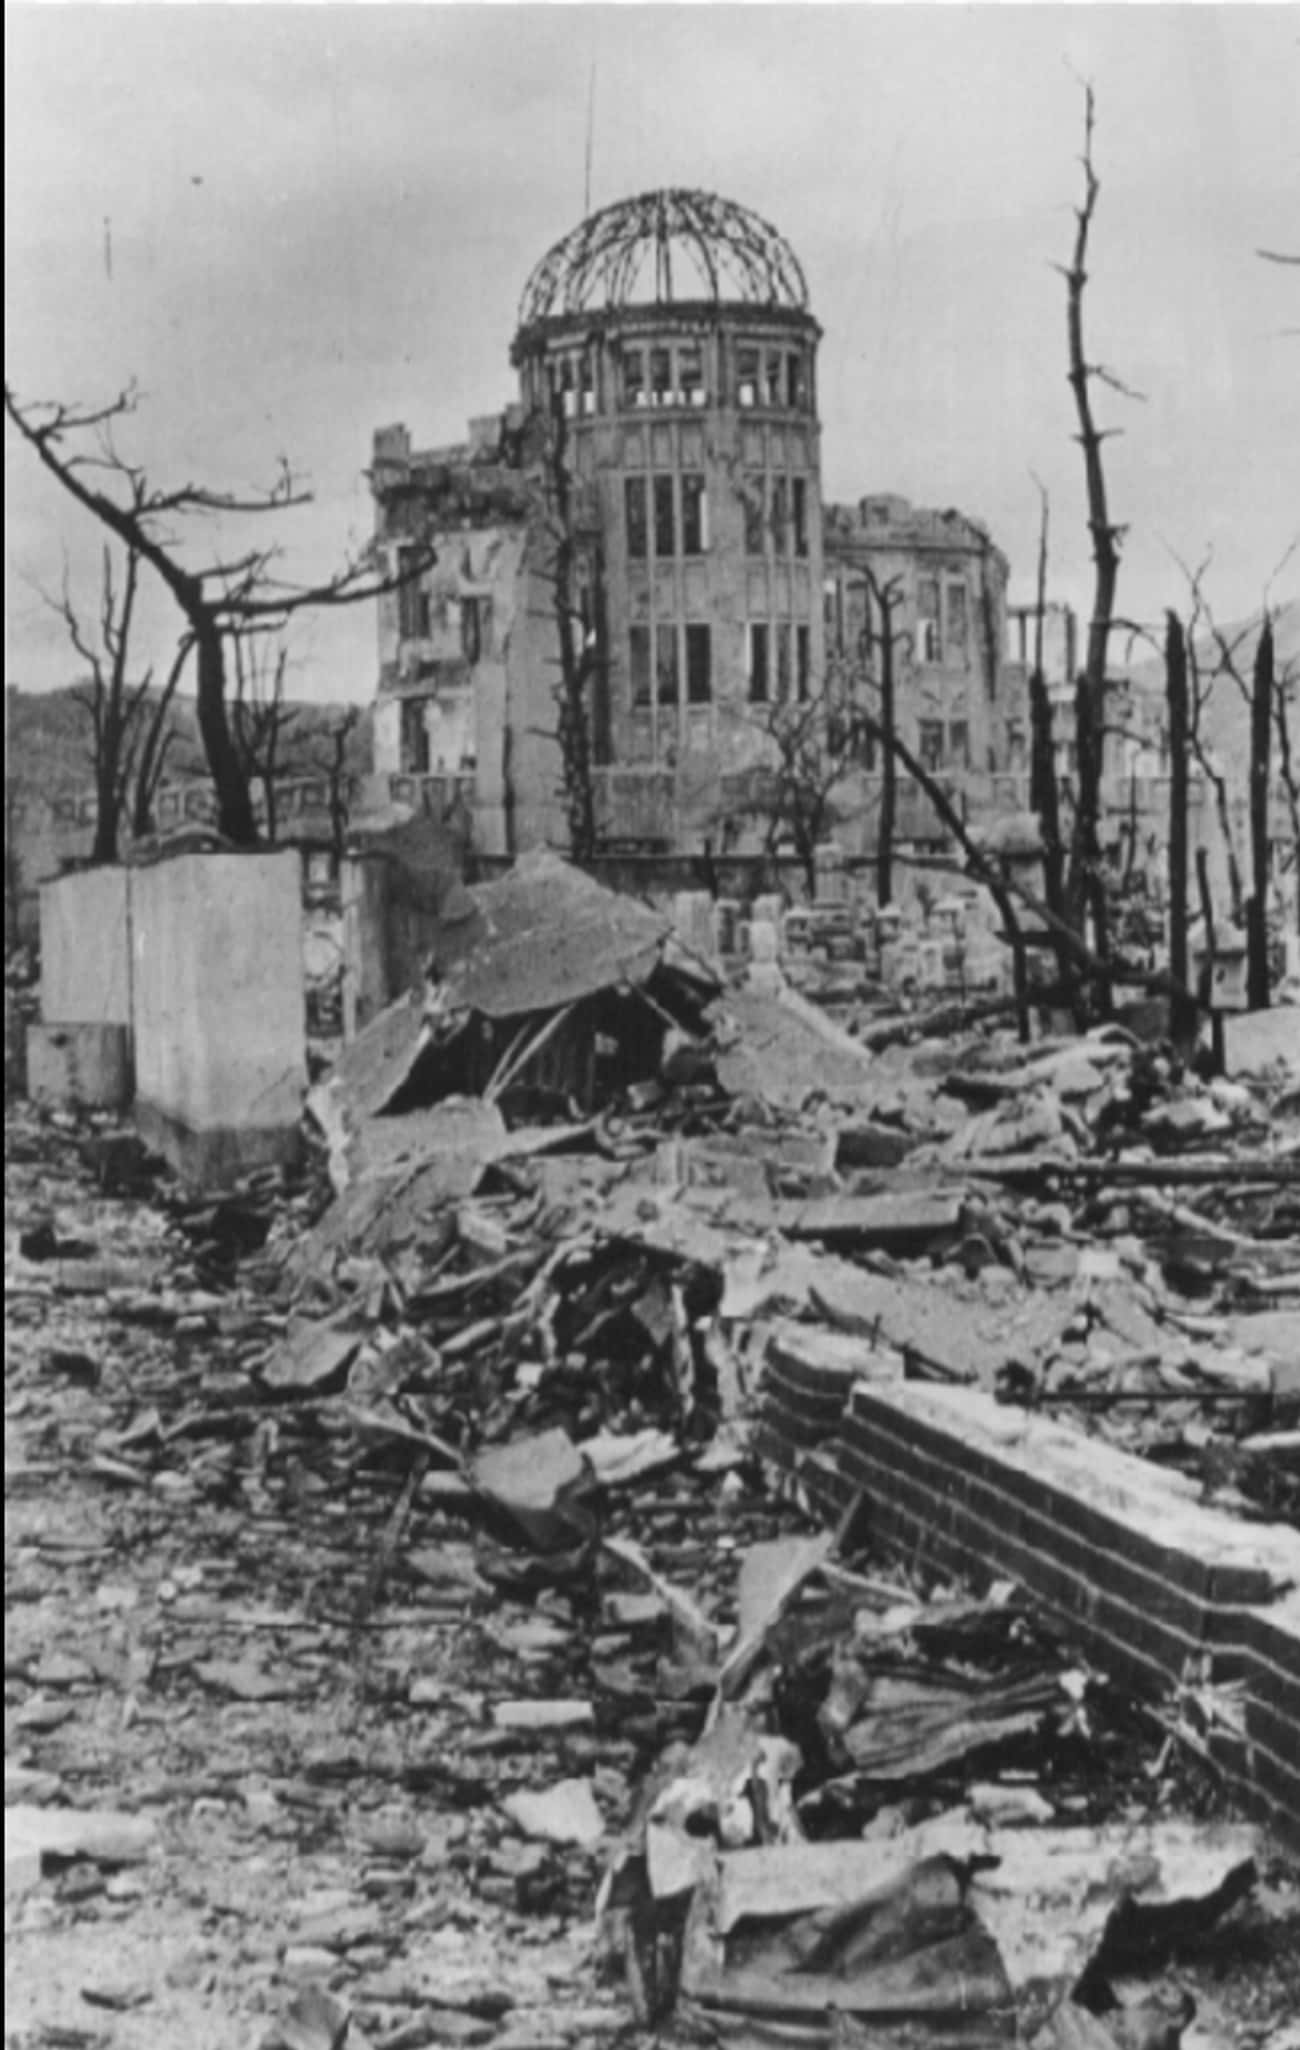 Over 90% Of The Doctors In Hiroshima Passed Or Were Injured 